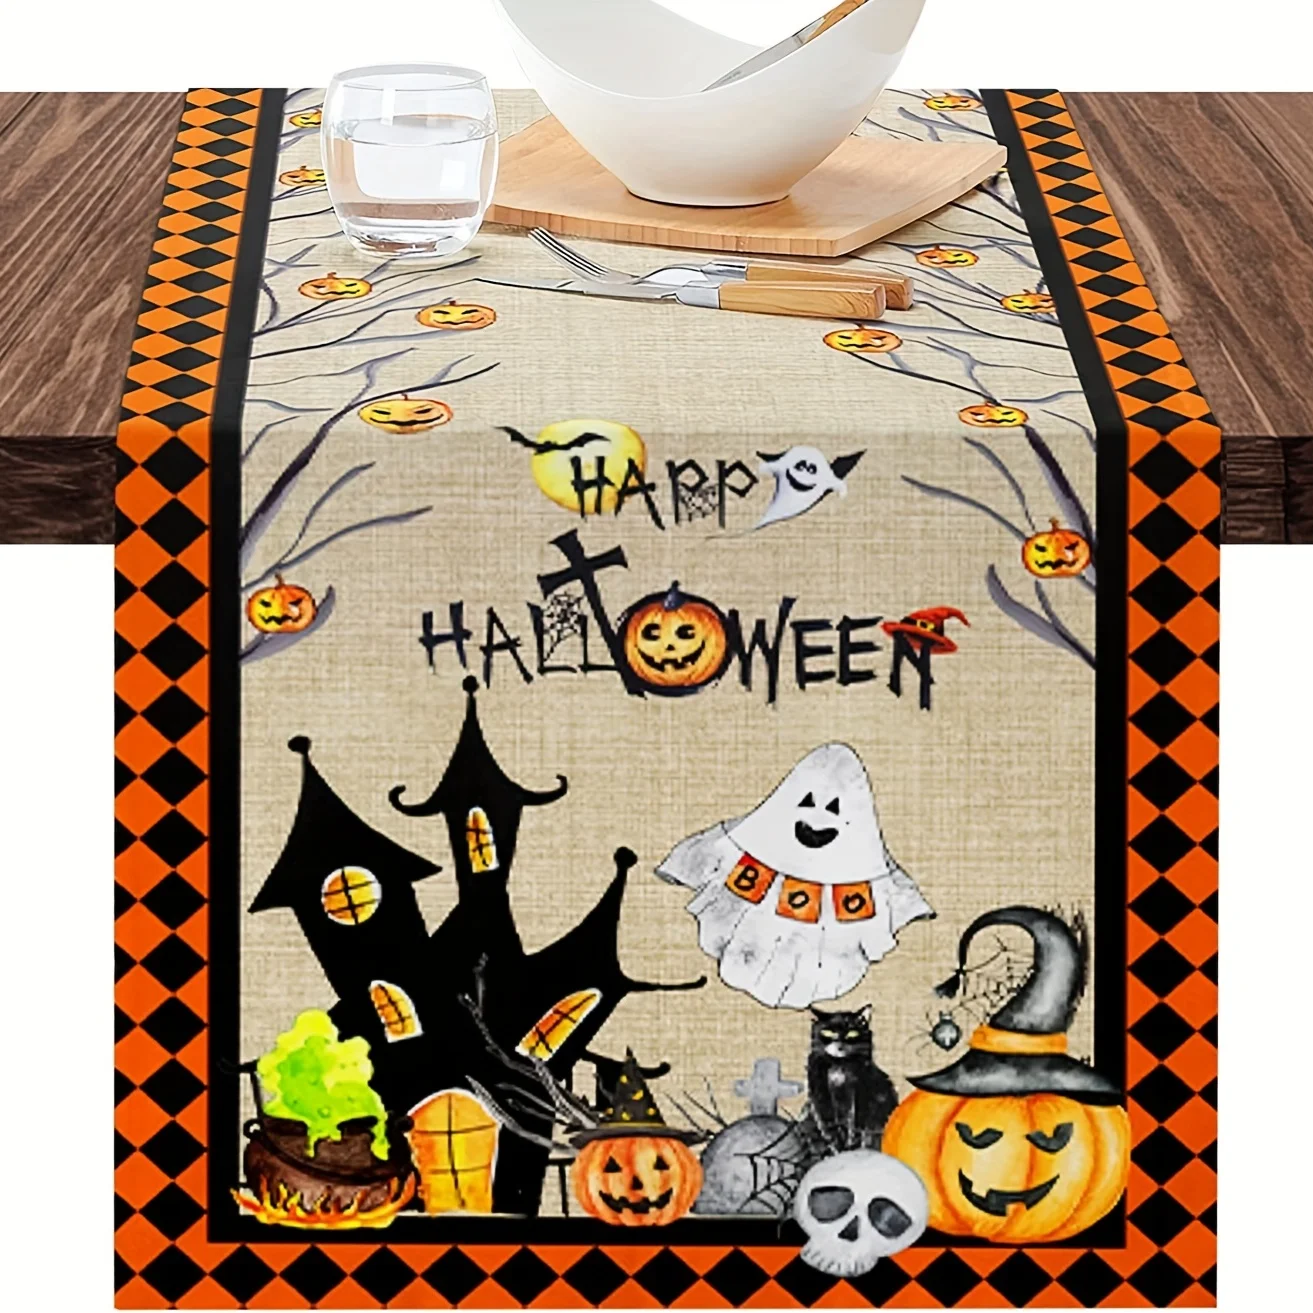 

Halloween Pumpkin Castle Linen Table Runners Kitchen Table Decor Washable Farmhouse Table Runners for Dining Table Party Decora